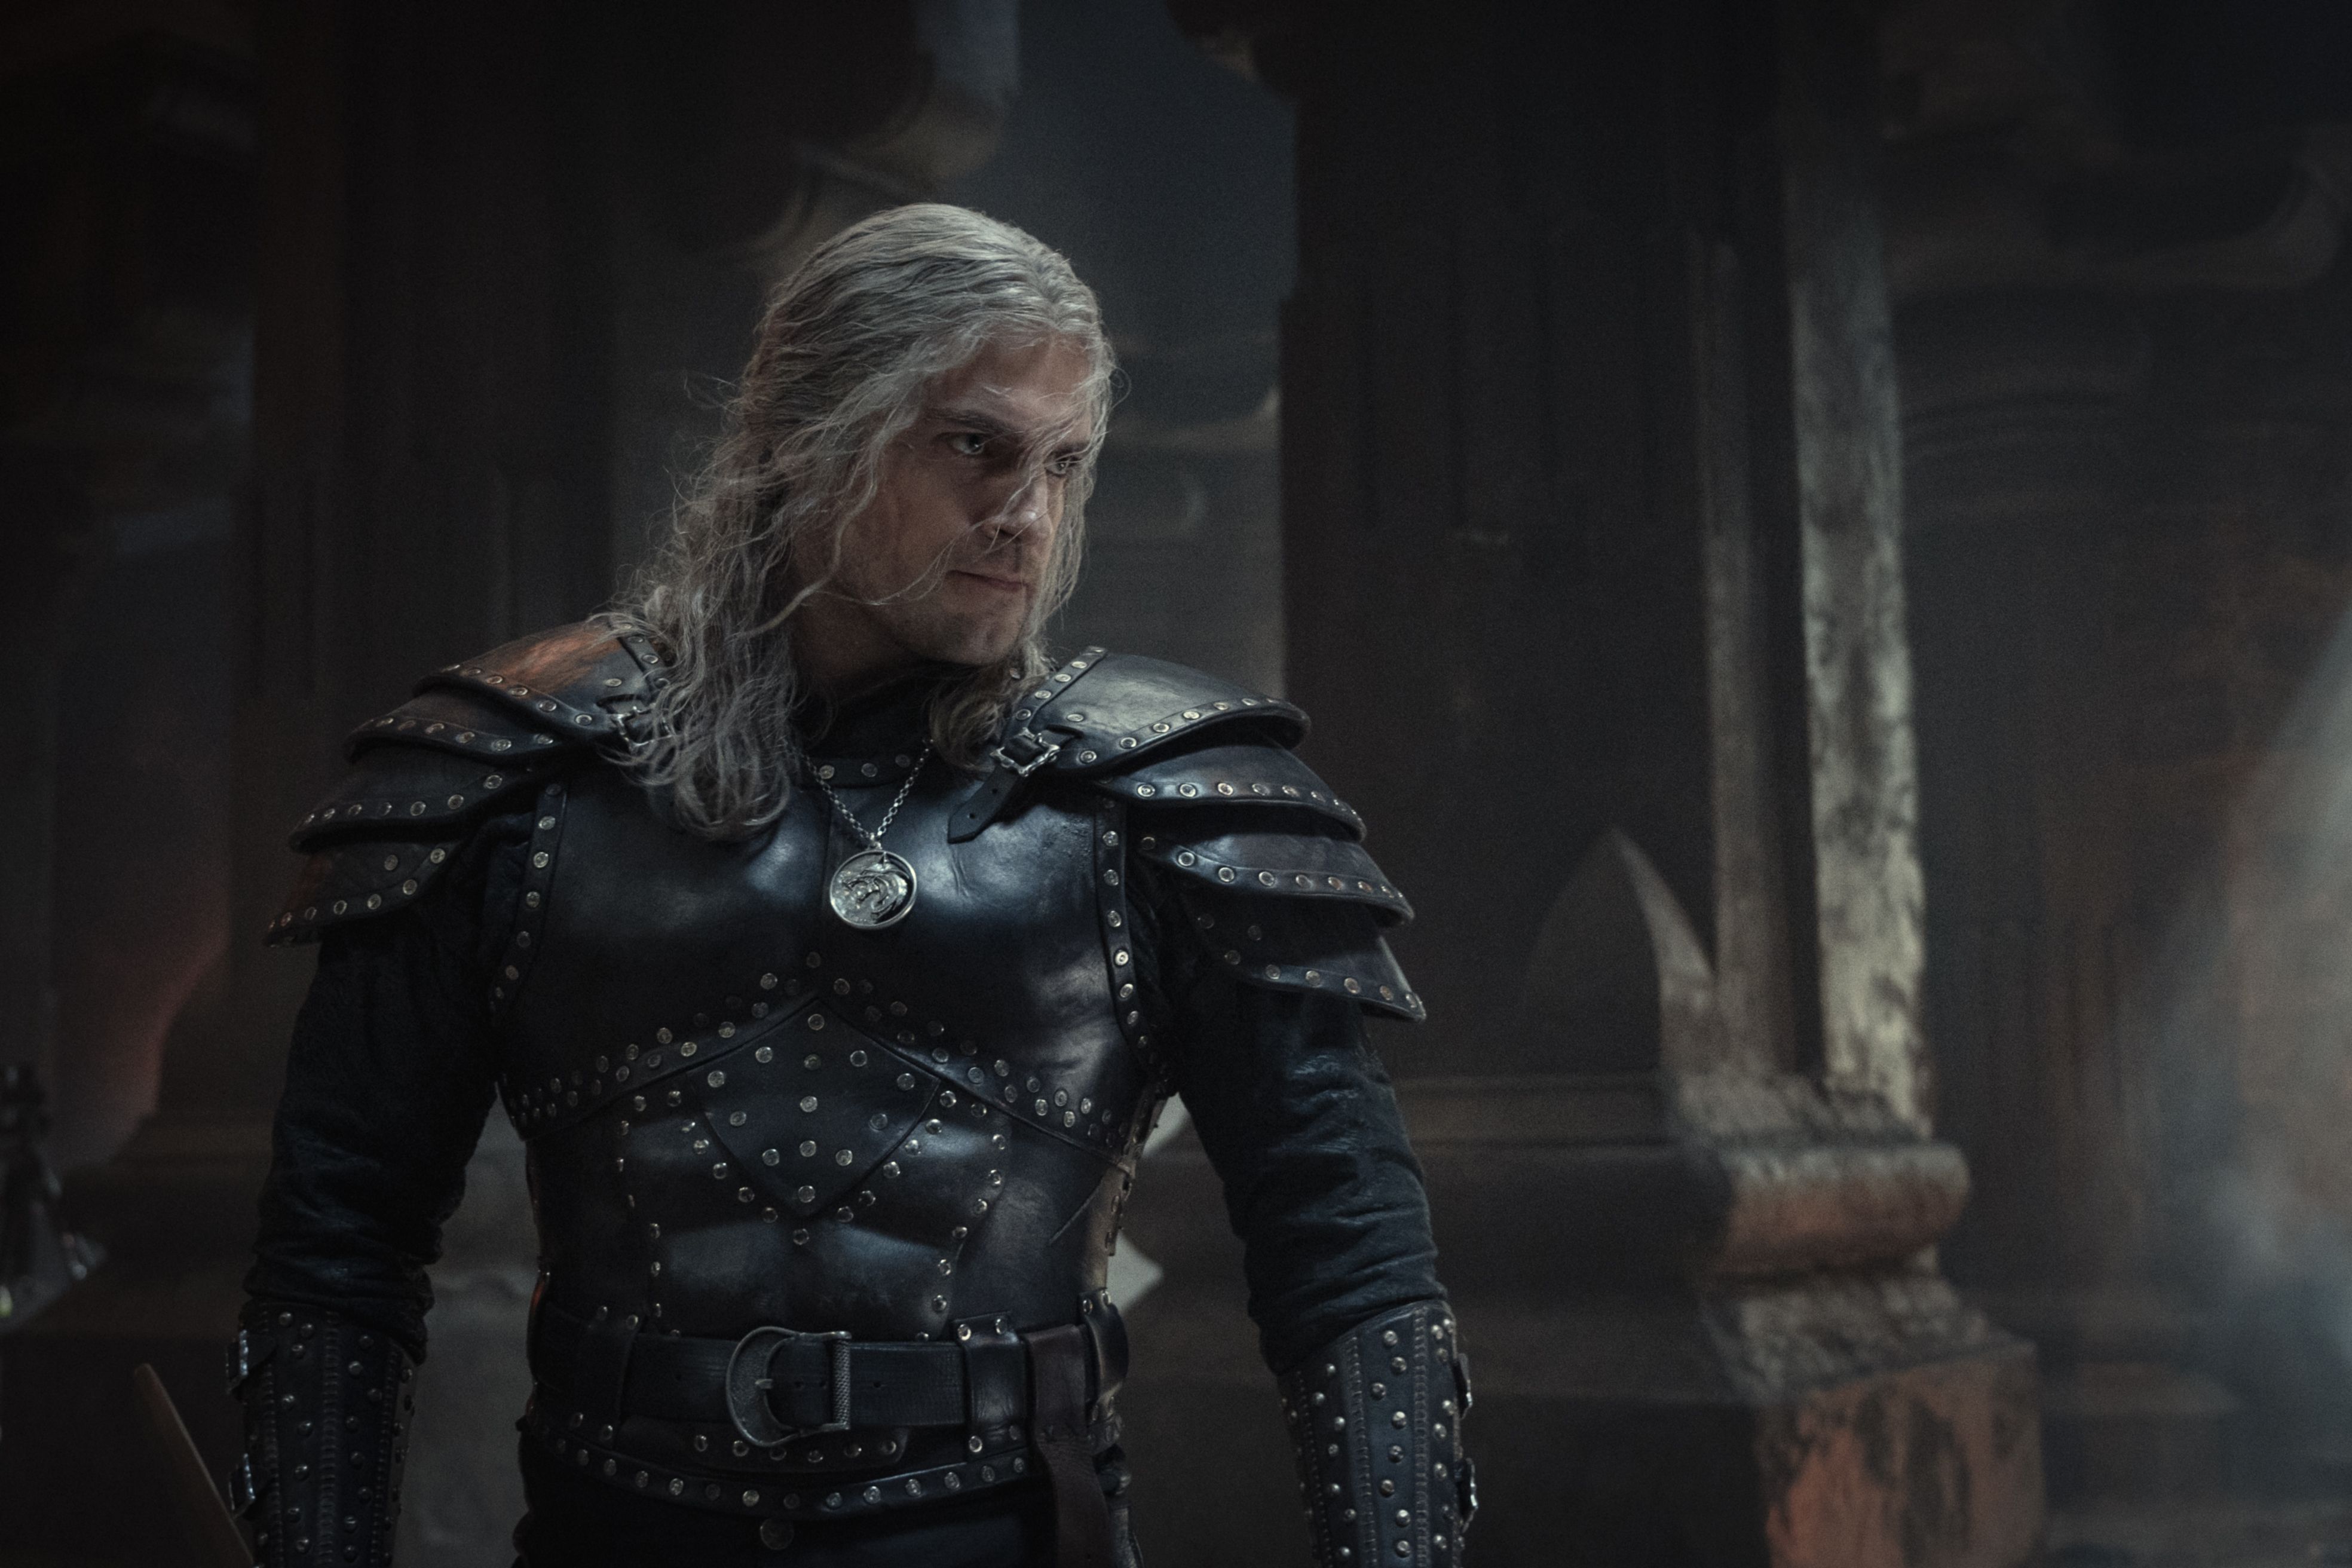 Why 'The Witcher 3' Is So Much Better Than 'The Witcher 2' (So Far)